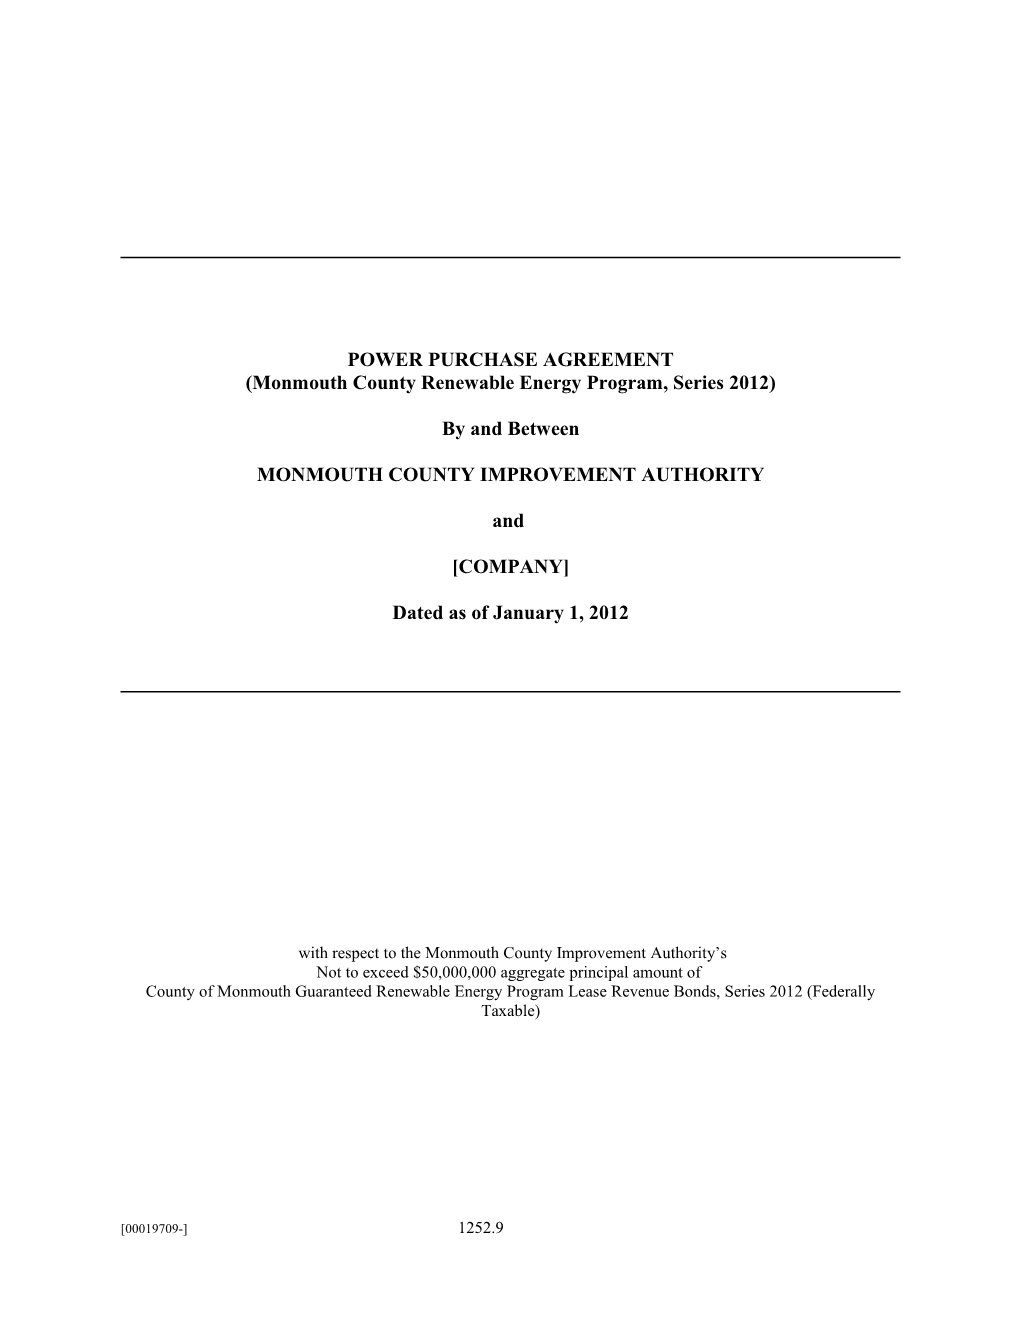 Power Purchase Agreement (00019709)